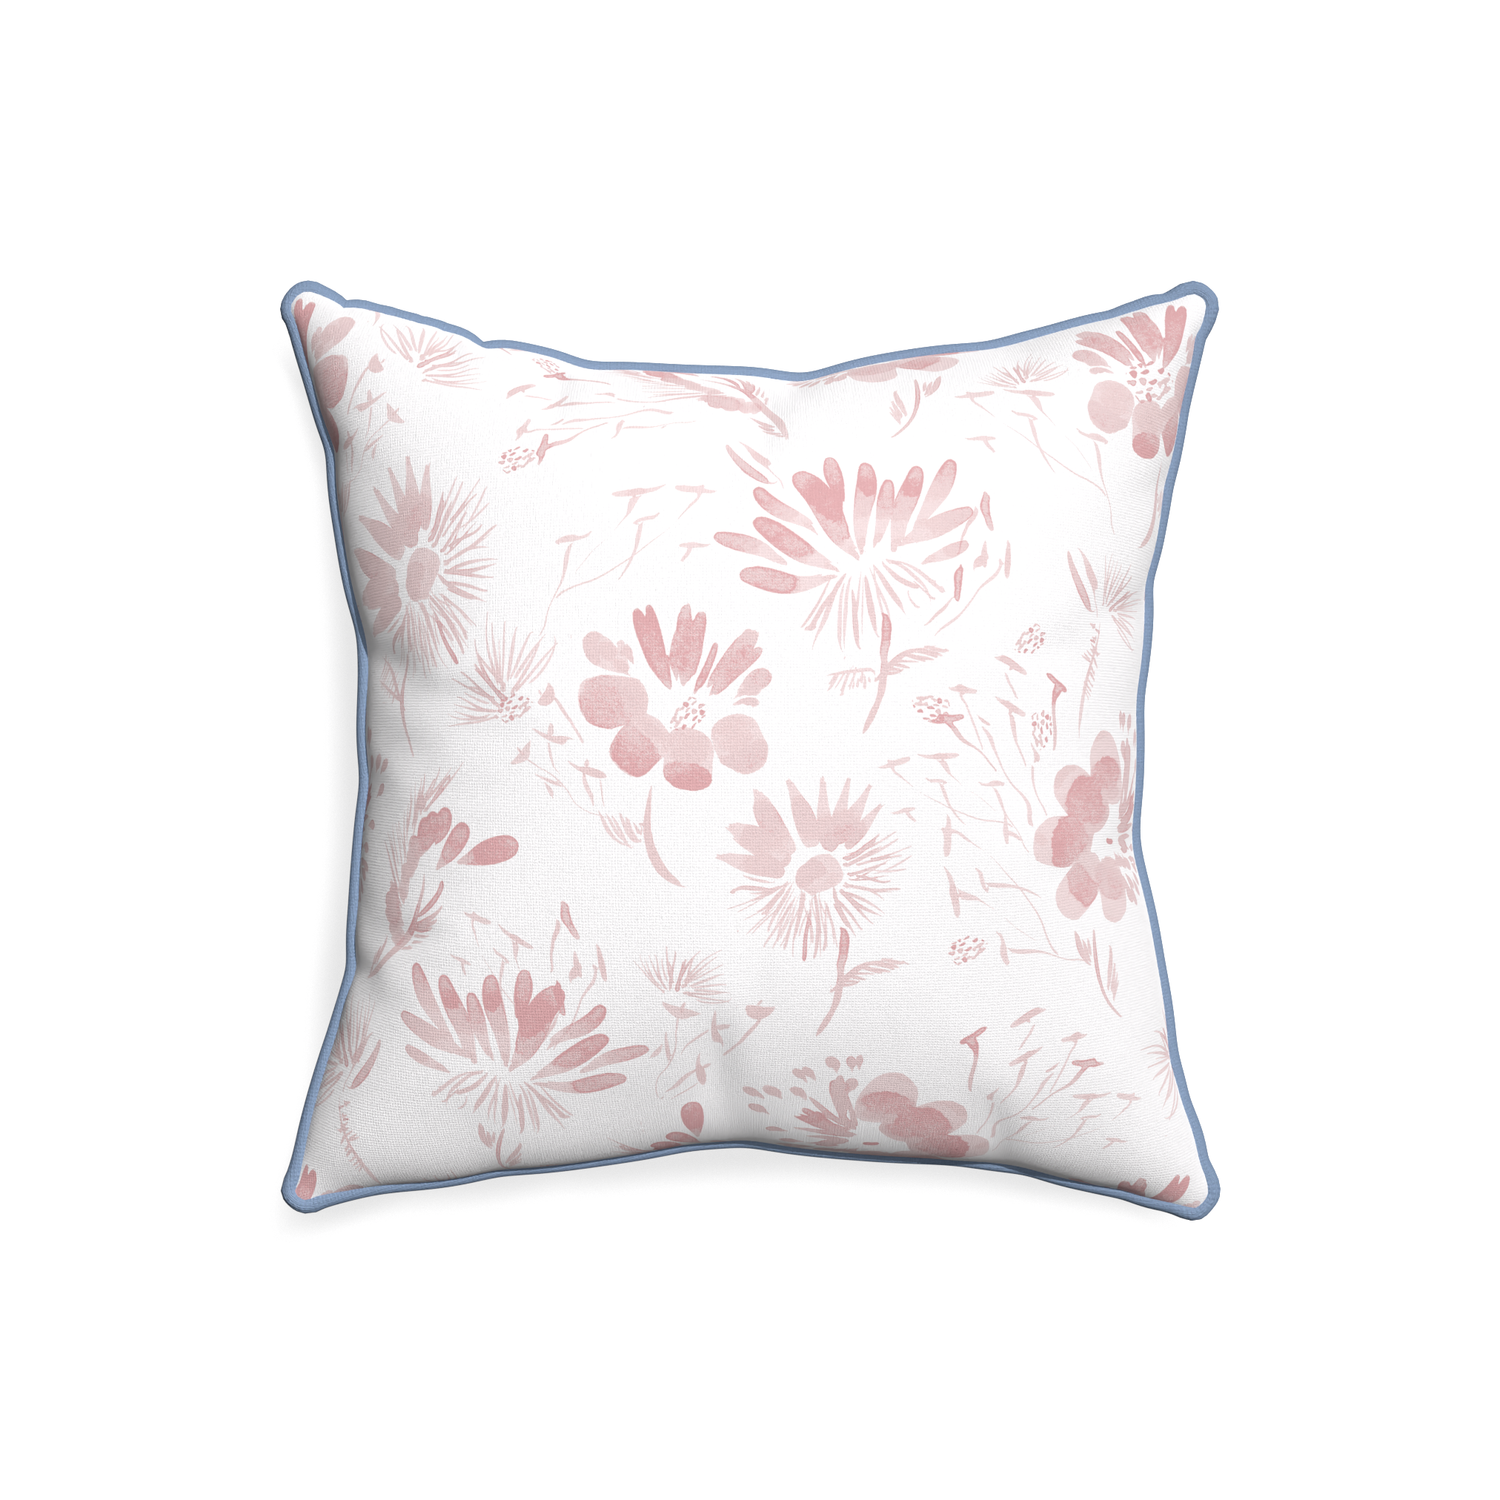 20-square blake custom pink floralpillow with sky piping on white background